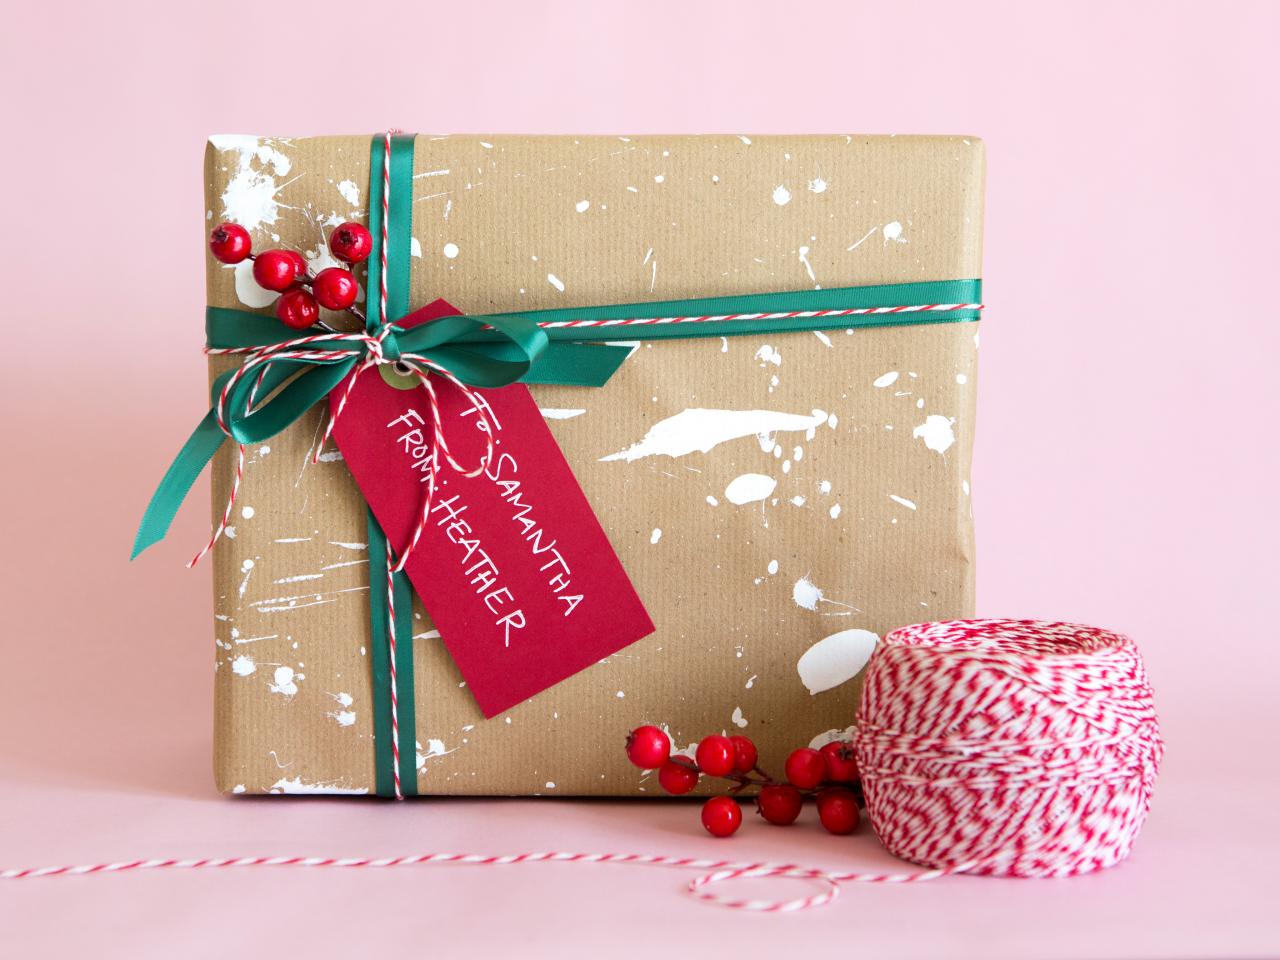 Christmas gift wrap ideas with cardboard and green velvet ribbon